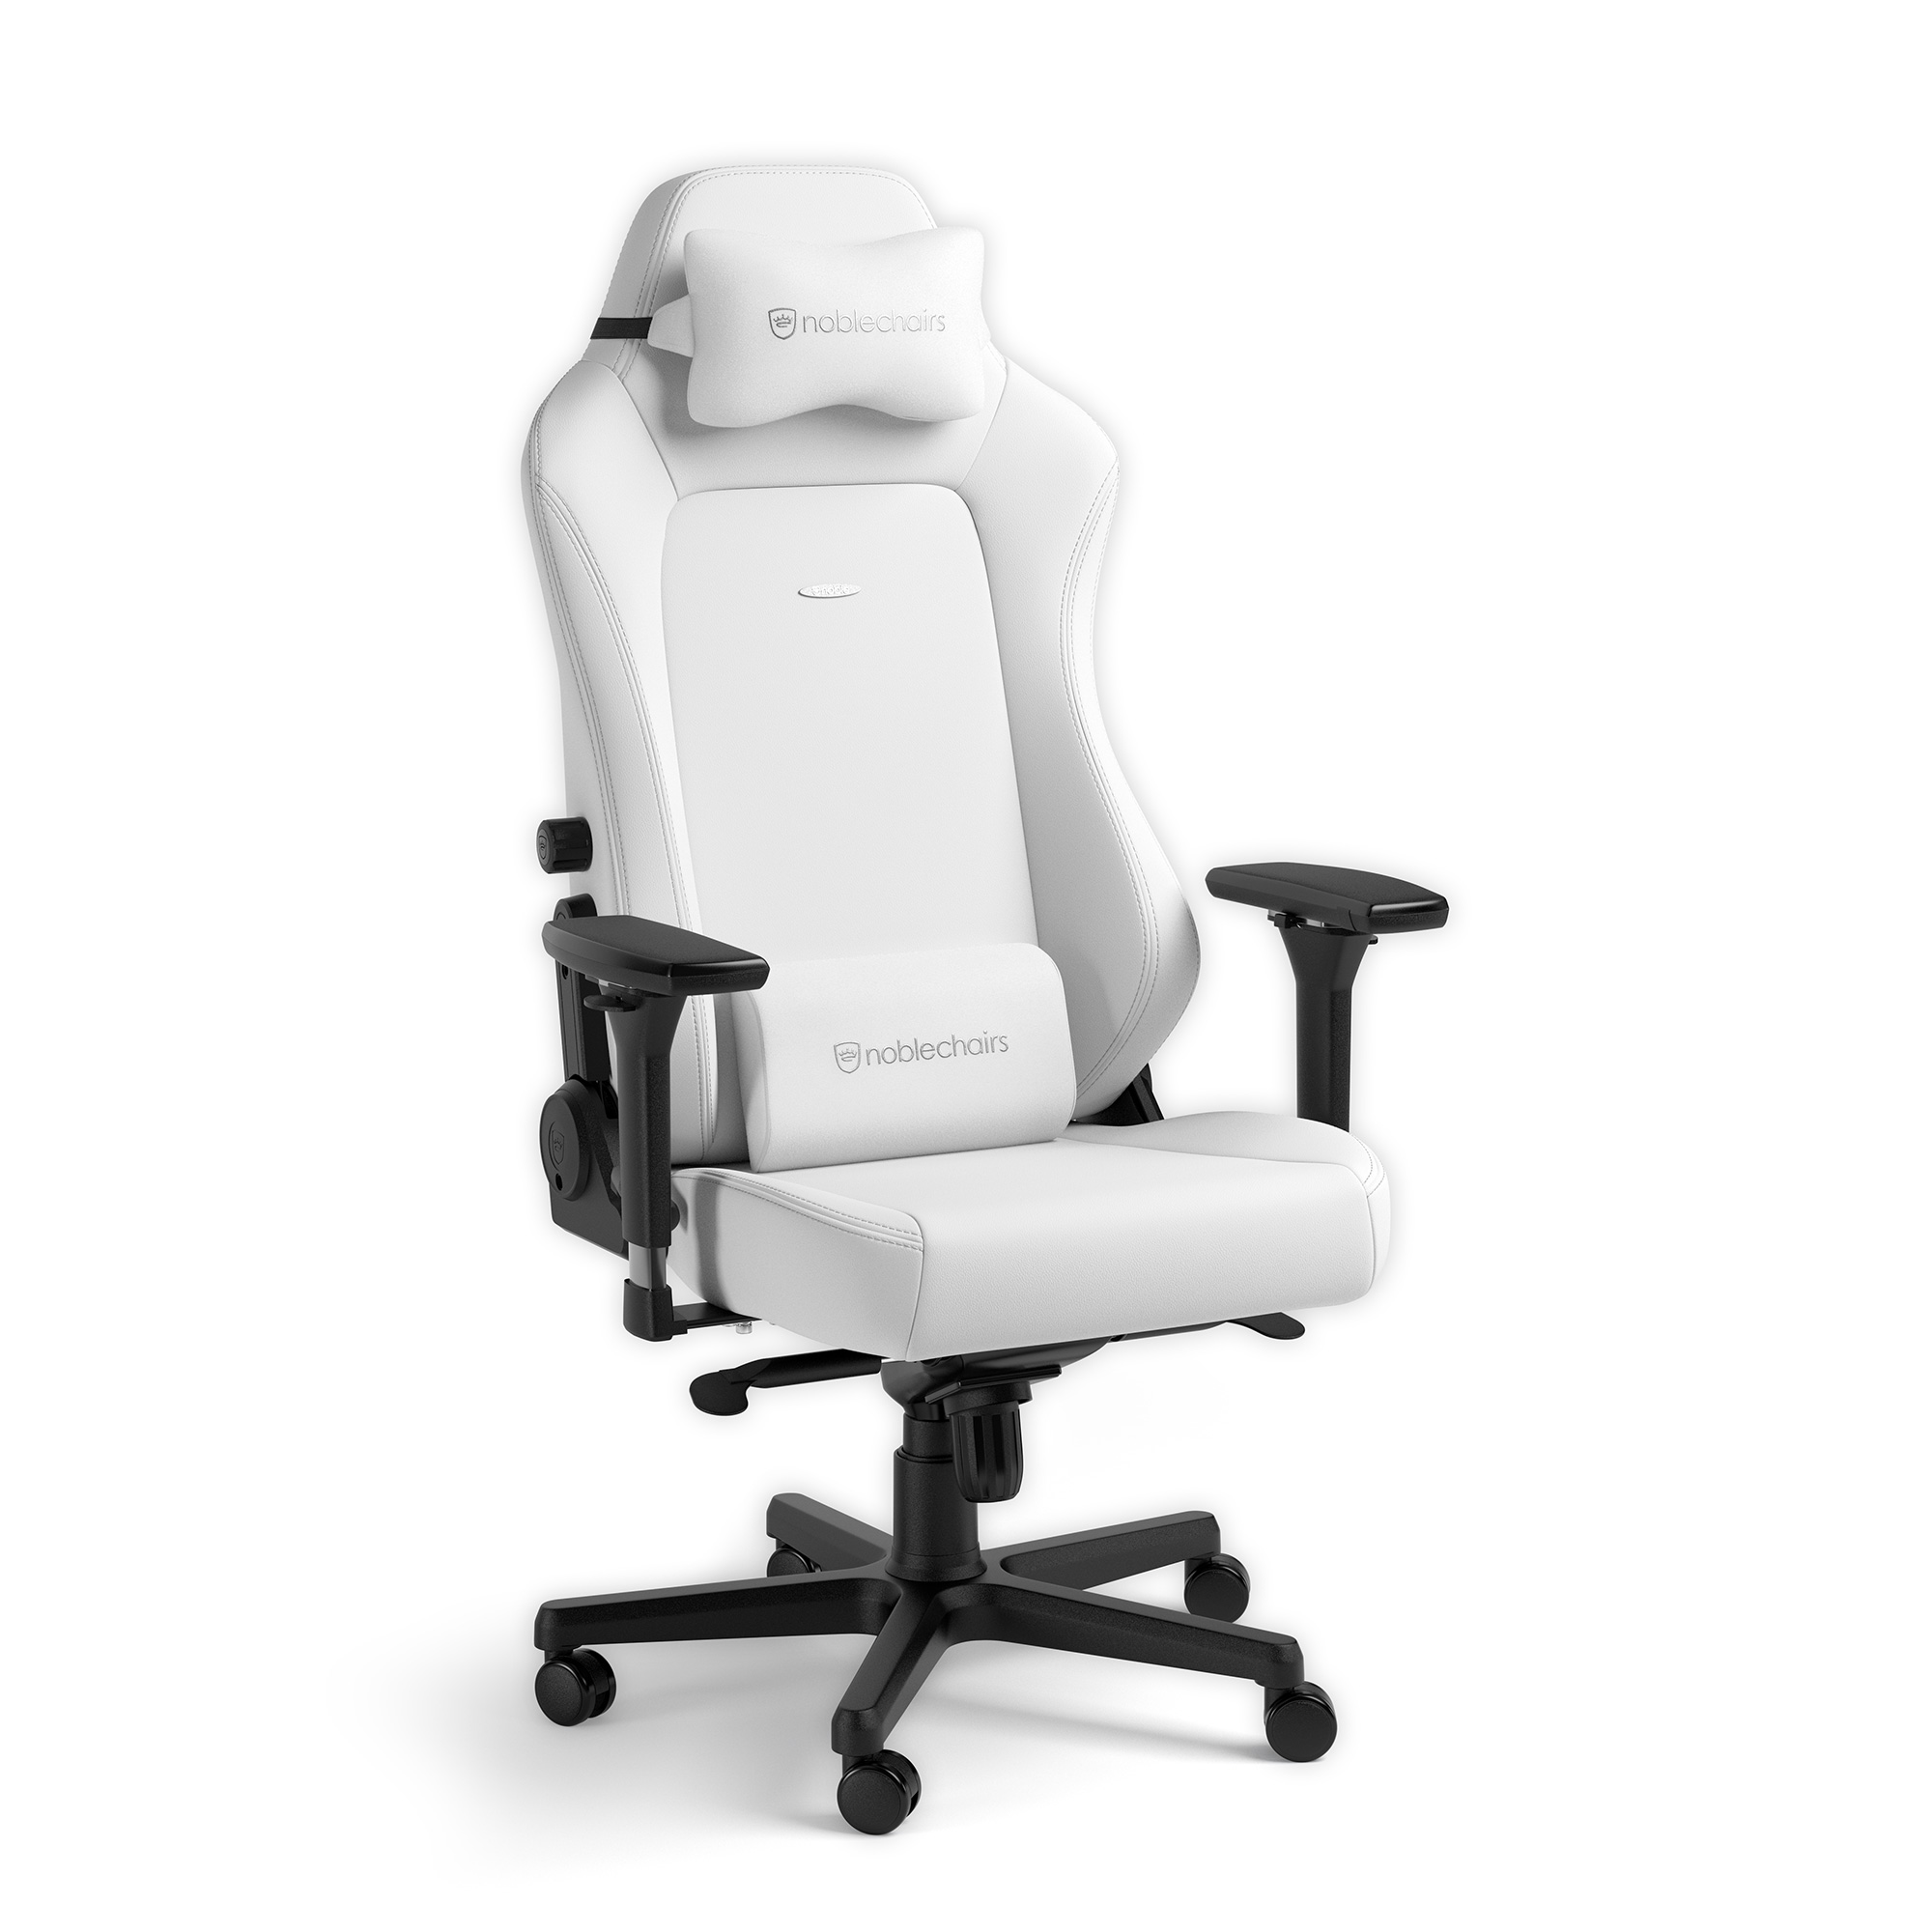 noblechairs - noblechairs HERO Gaming Chair - White Edition